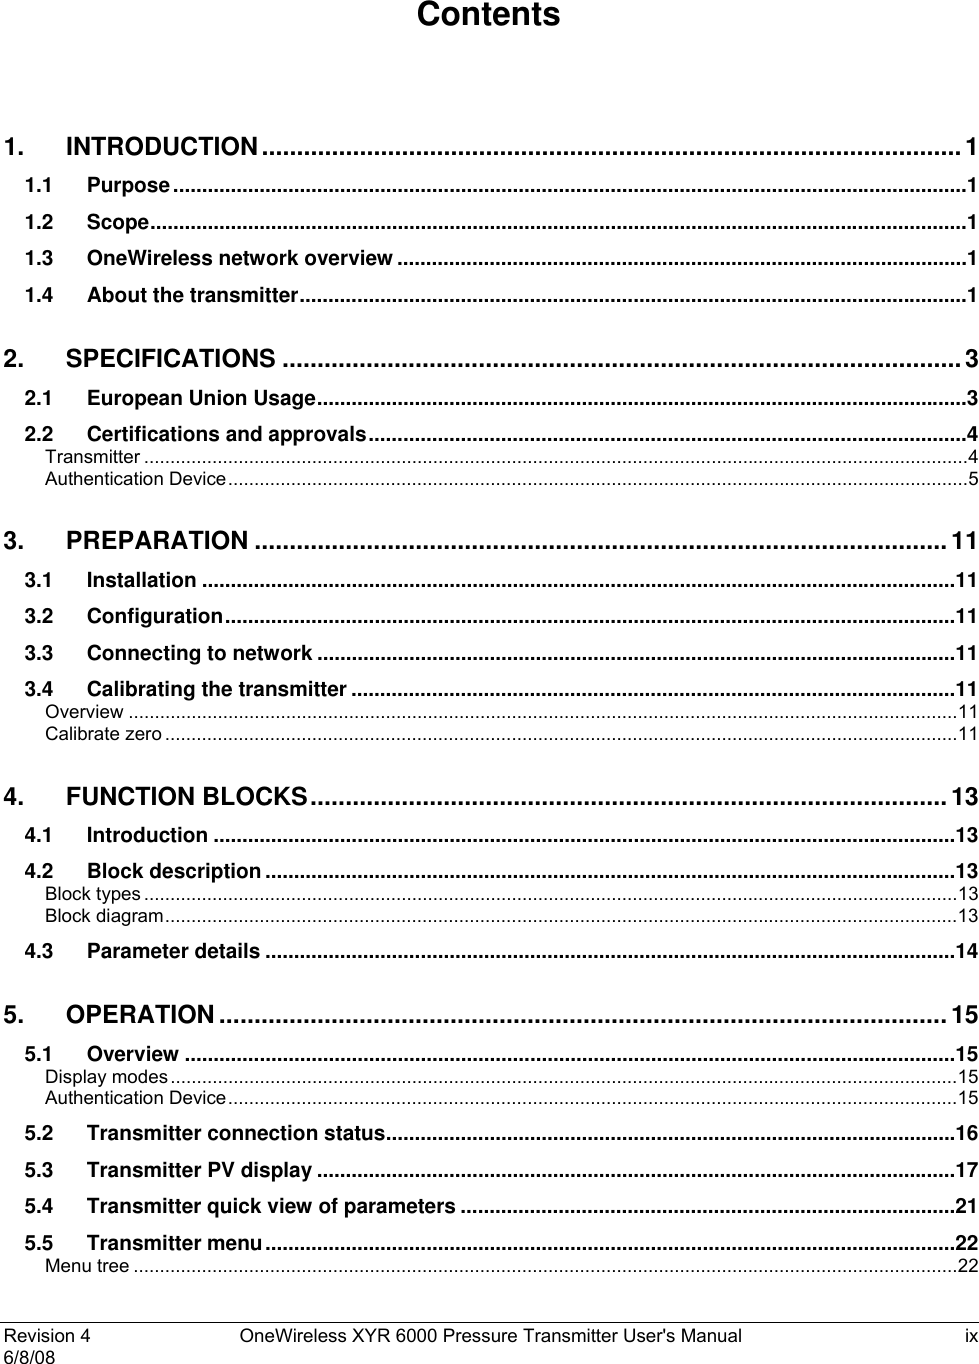  Revision 4  OneWireless XYR 6000 Pressure Transmitter User&apos;s Manual  ix 6/8/08    Contents  1. INTRODUCTION....................................................................................................1 1.1 Purpose..........................................................................................................................................1 1.2 Scope..............................................................................................................................................1 1.3 OneWireless network overview ...................................................................................................1 1.4 About the transmitter....................................................................................................................1 2. SPECIFICATIONS .................................................................................................3 2.1 European Union Usage.................................................................................................................3 2.2 Certifications and approvals........................................................................................................4 Transmitter .............................................................................................................................................................4 Authentication Device.............................................................................................................................................5 3. PREPARATION ...................................................................................................11 3.1 Installation ...................................................................................................................................11 3.2 Configuration...............................................................................................................................11 3.3 Connecting to network ...............................................................................................................11 3.4 Calibrating the transmitter .........................................................................................................11 Overview ..............................................................................................................................................................11 Calibrate zero .......................................................................................................................................................11 4. FUNCTION BLOCKS........................................................................................... 13 4.1 Introduction .................................................................................................................................13 4.2 Block description ........................................................................................................................13 Block types ...........................................................................................................................................................13 Block diagram.......................................................................................................................................................13 4.3 Parameter details ........................................................................................................................14 5. OPERATION ........................................................................................................15 5.1 Overview ......................................................................................................................................15 Display modes......................................................................................................................................................15 Authentication Device...........................................................................................................................................15 5.2 Transmitter connection status...................................................................................................16 5.3 Transmitter PV display ...............................................................................................................17 5.4 Transmitter quick view of parameters ......................................................................................21 5.5 Transmitter menu........................................................................................................................22 Menu tree .............................................................................................................................................................22 